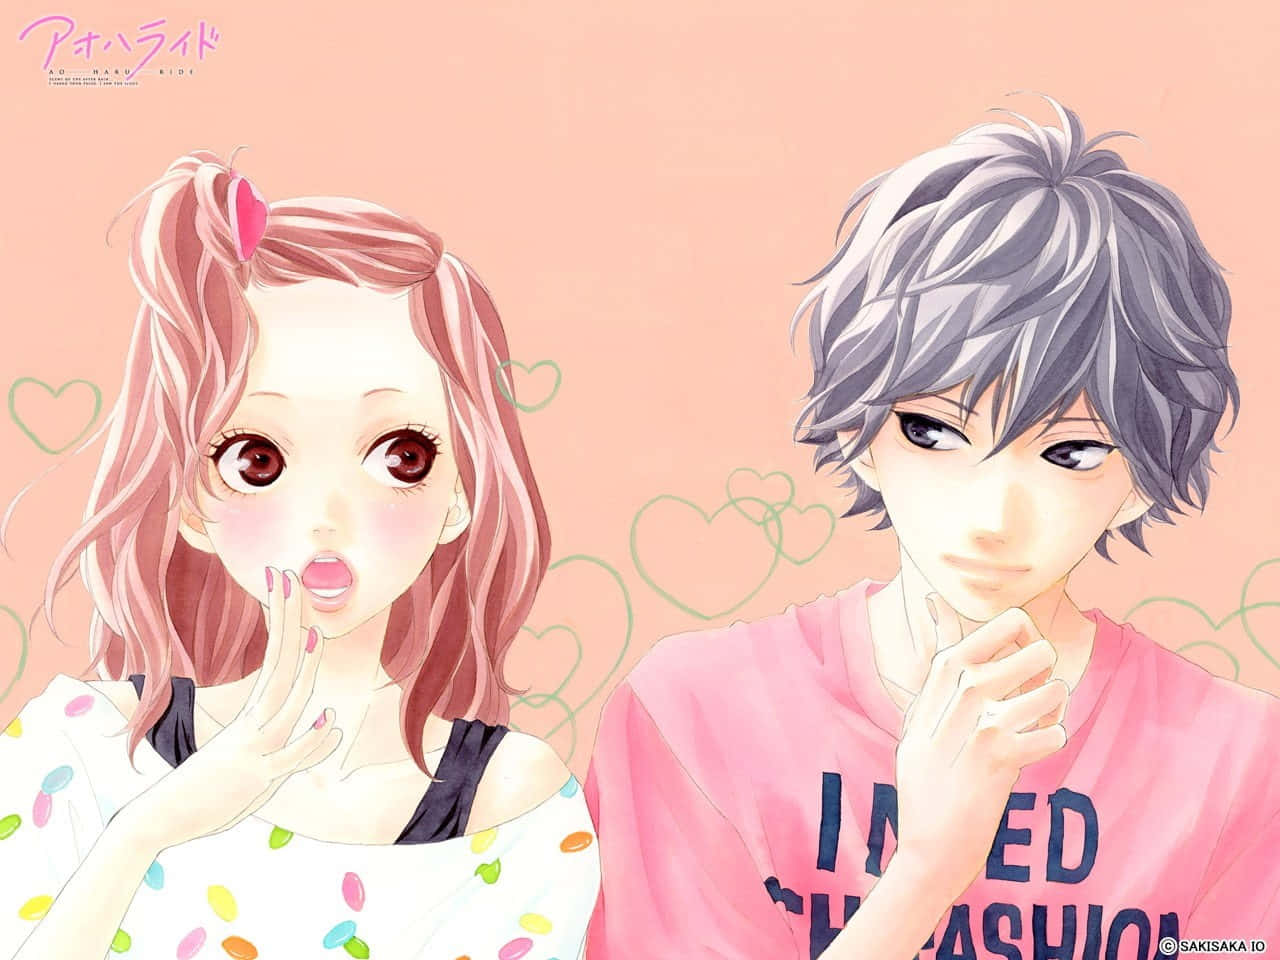 "Find true love in the pages of Ao Haru Ride!"